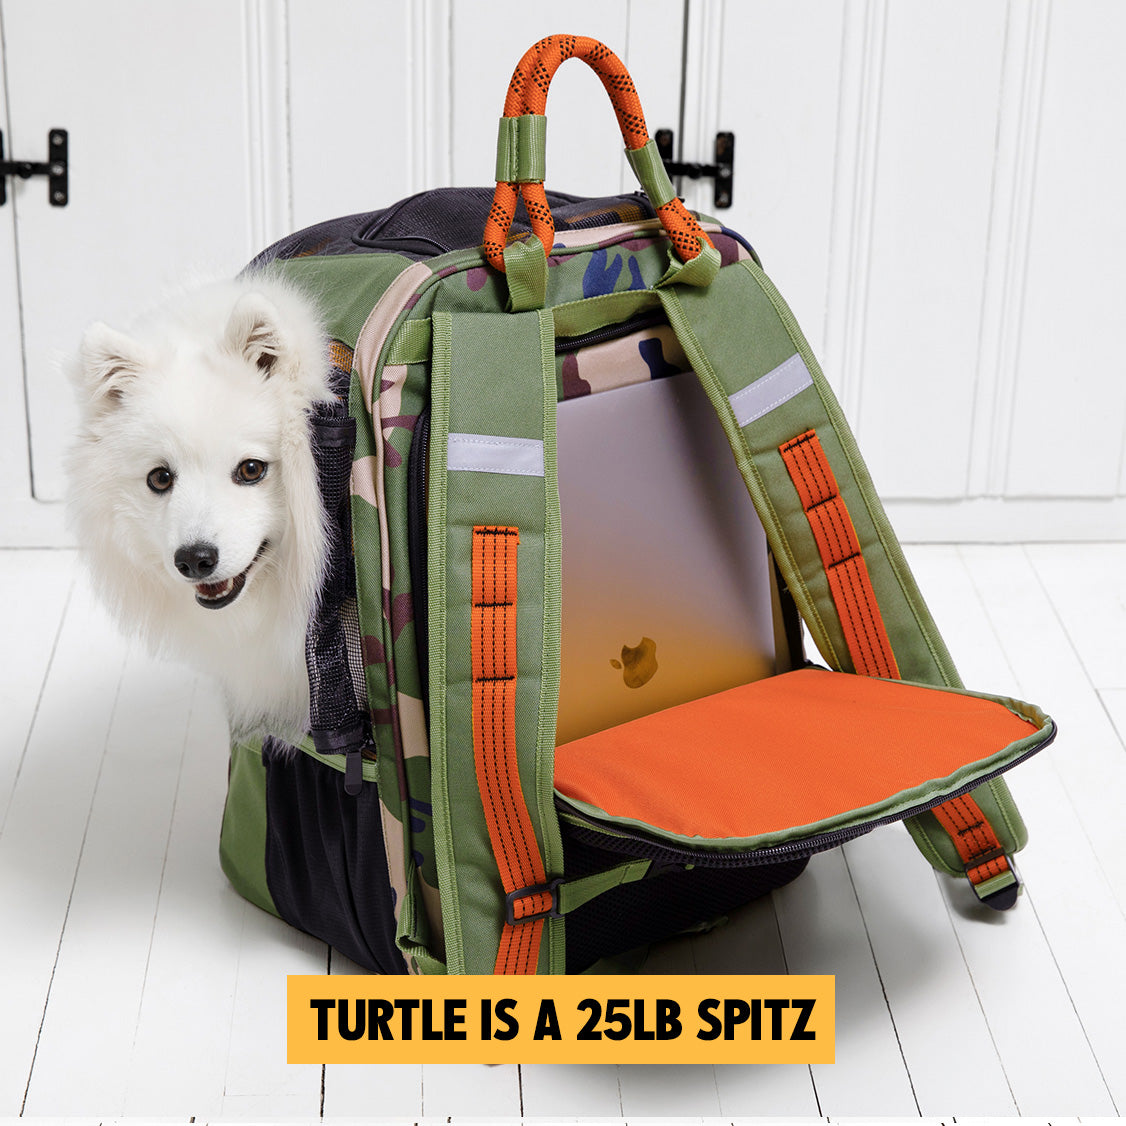 Pet carrier with Web